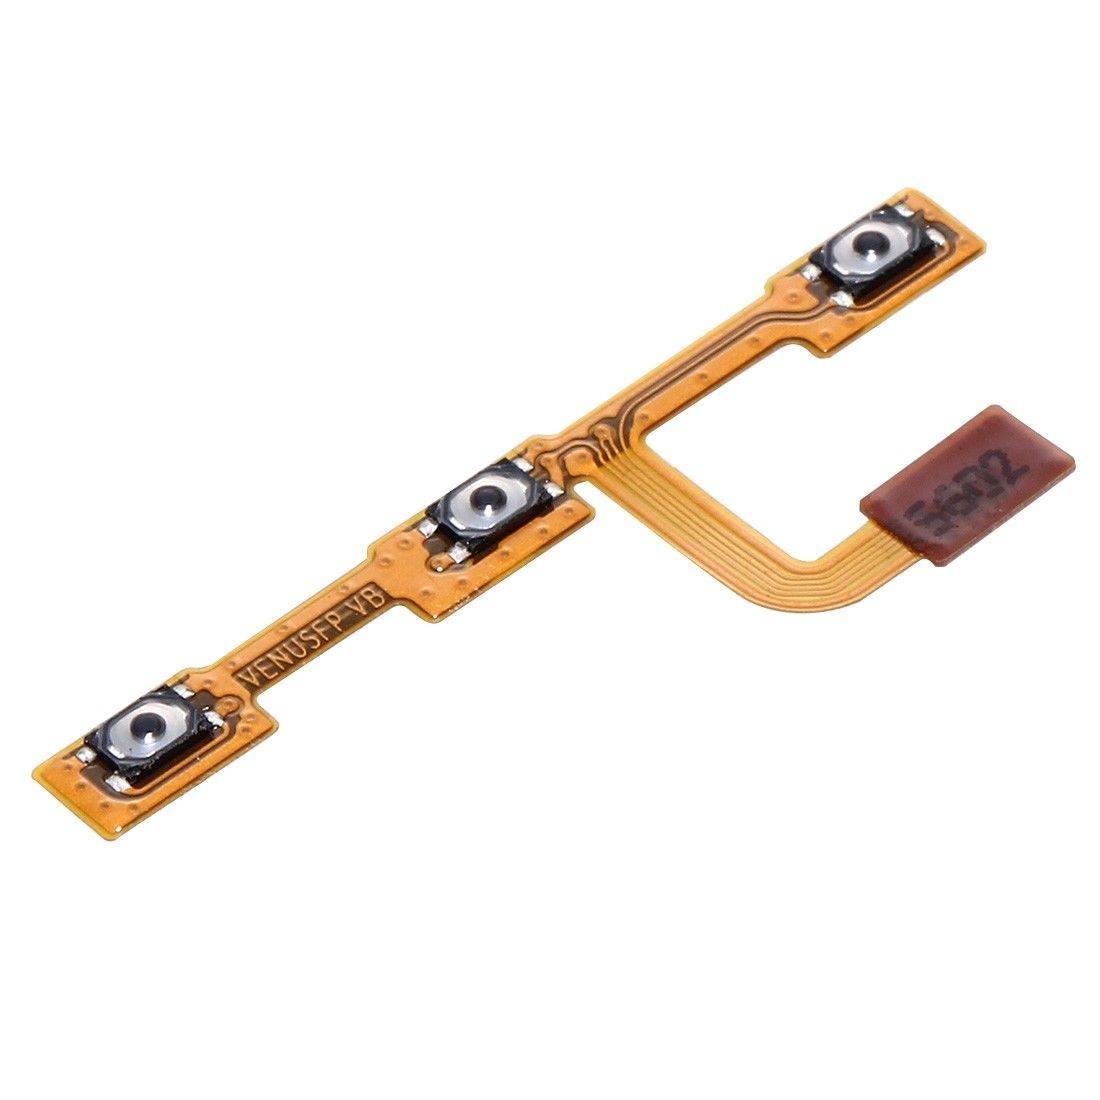 Huawei P9 Lite Replacement Volume & Power On/Off Buttons Flex Cable for [product_price] - First Help Tech